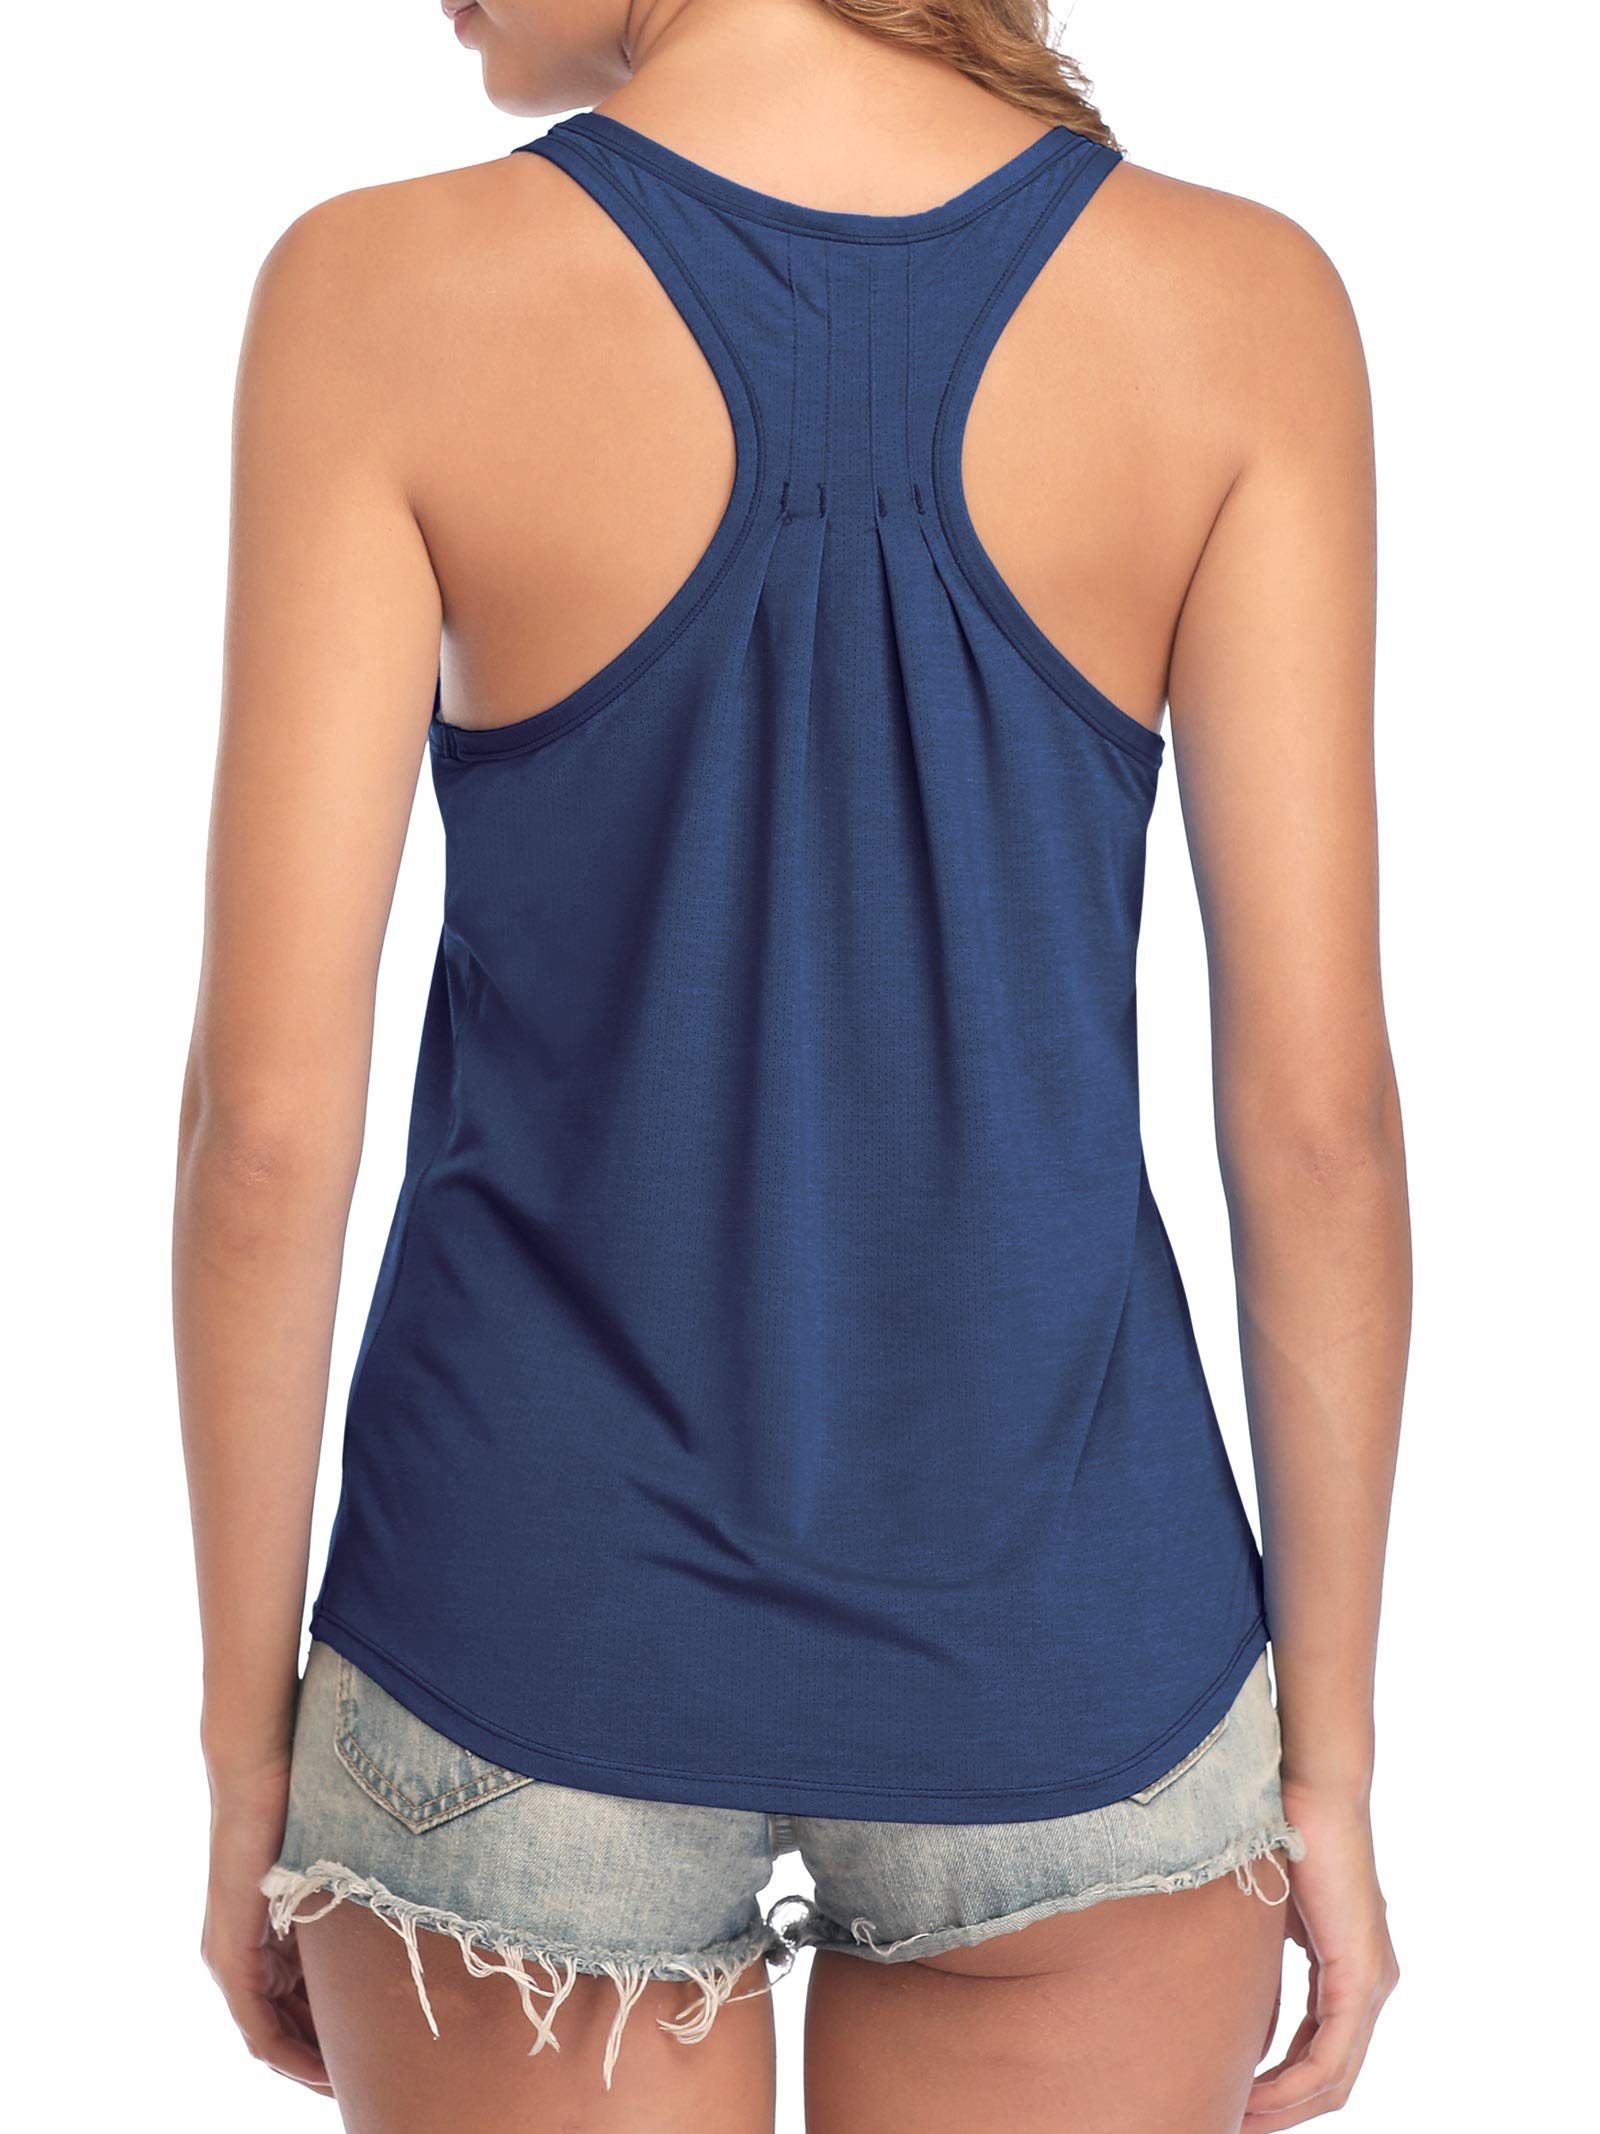 ATTRACO Yoga Tank Tops for Women Activewear